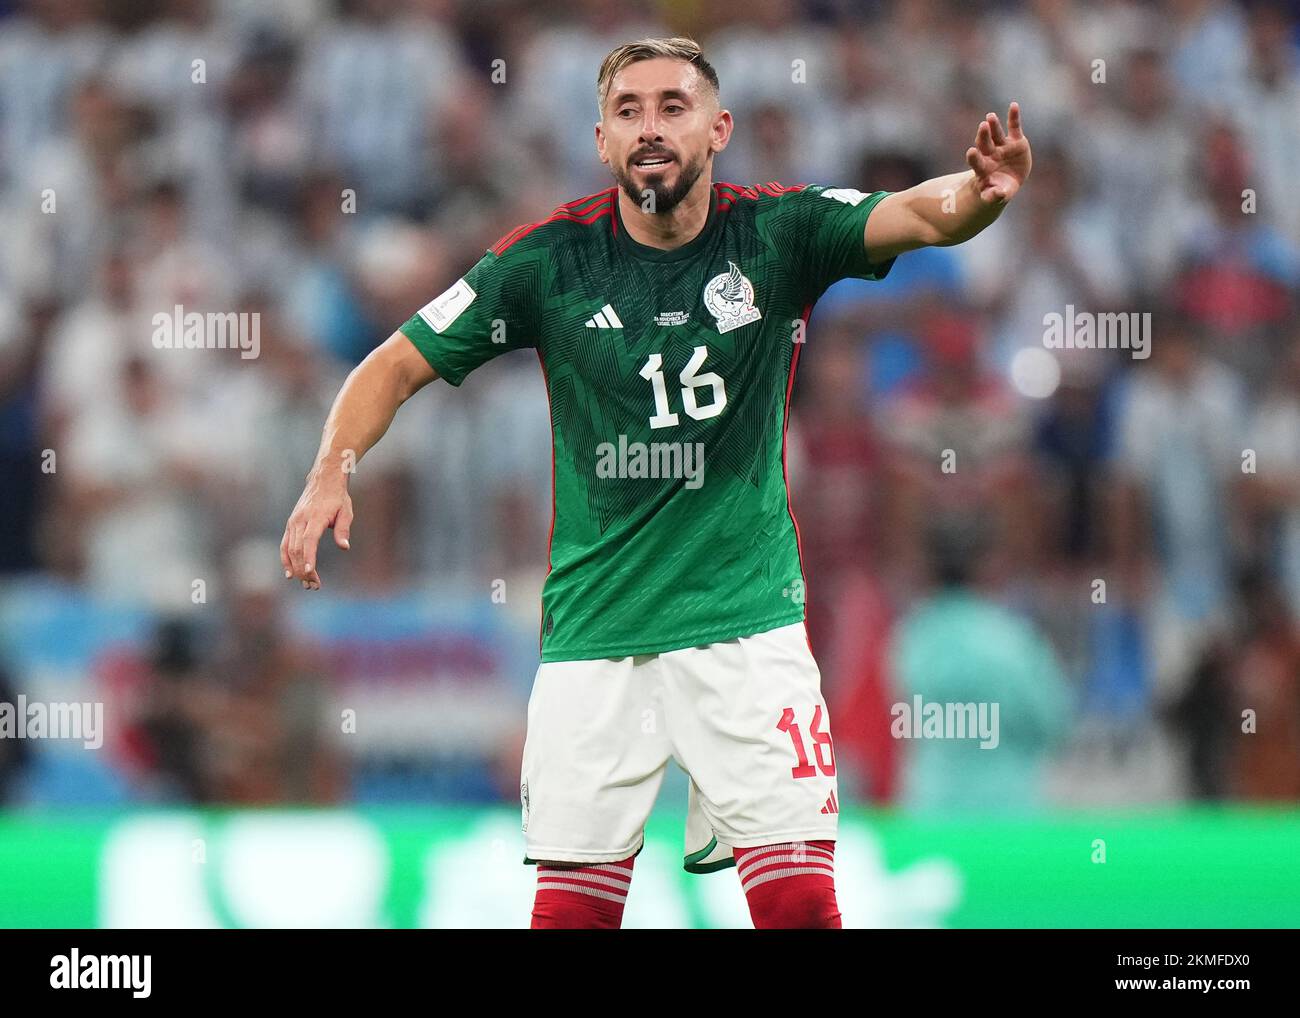 Hector Herrera of Mexico during the FIFA World Cup Qatar 2022 match, Group C, between Argentina and Mexico played at Lusail Stadium on Nov 26, 2022 in Lusail, Qatar. (Photo by Bagu Blanco / PRESSIN) Credit: PRESSINPHOTO SPORTS AGENCY/Alamy Live News Stock Photo